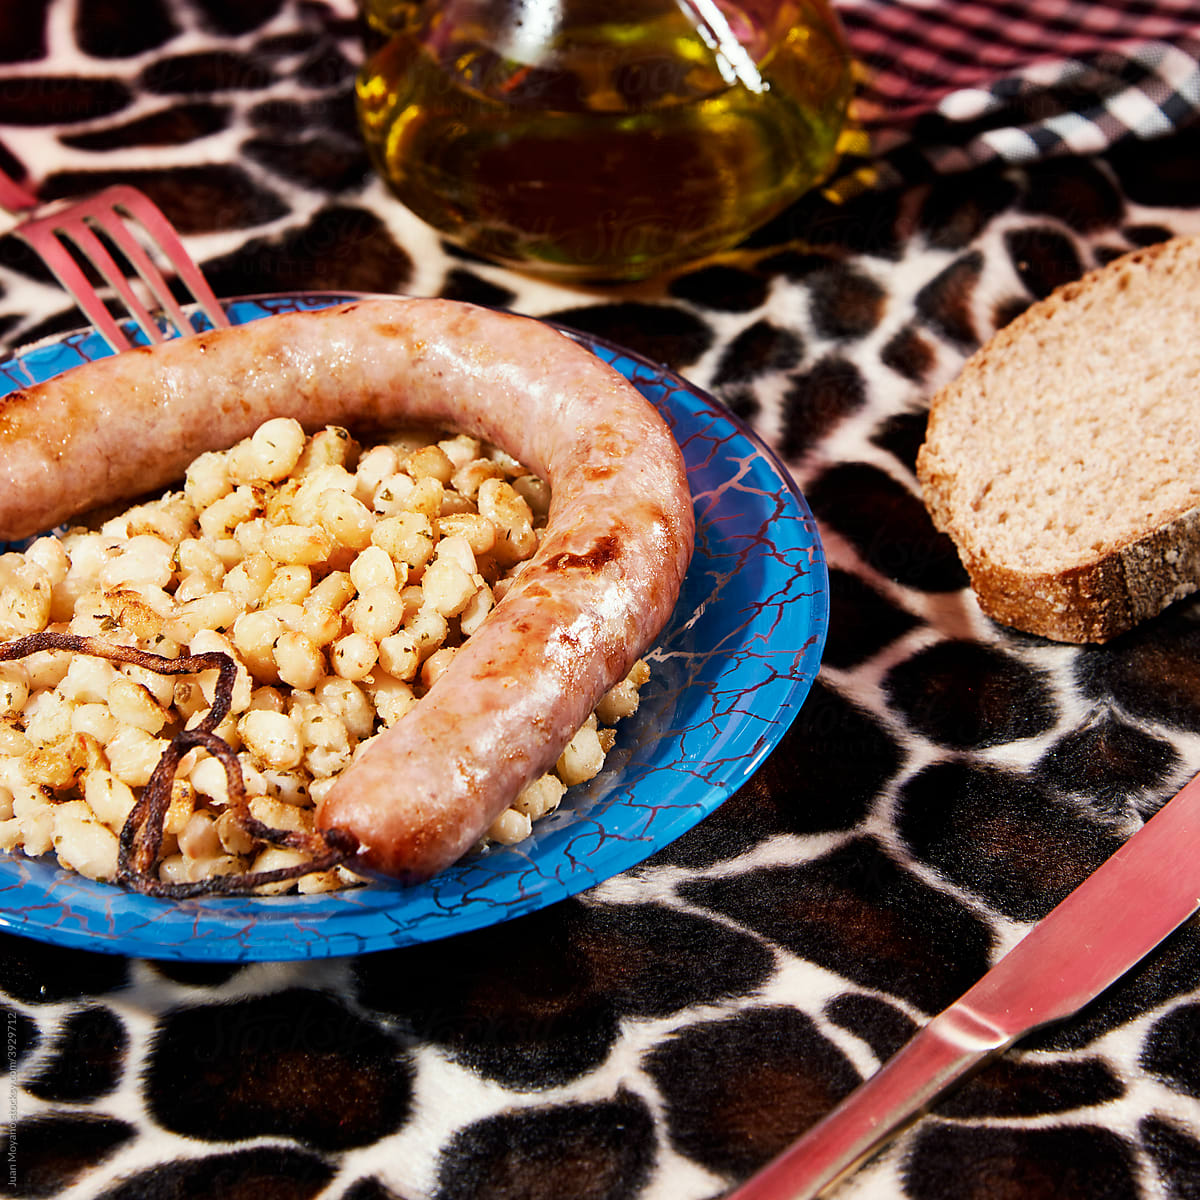 fried white beans and sausage, typical of catalonia